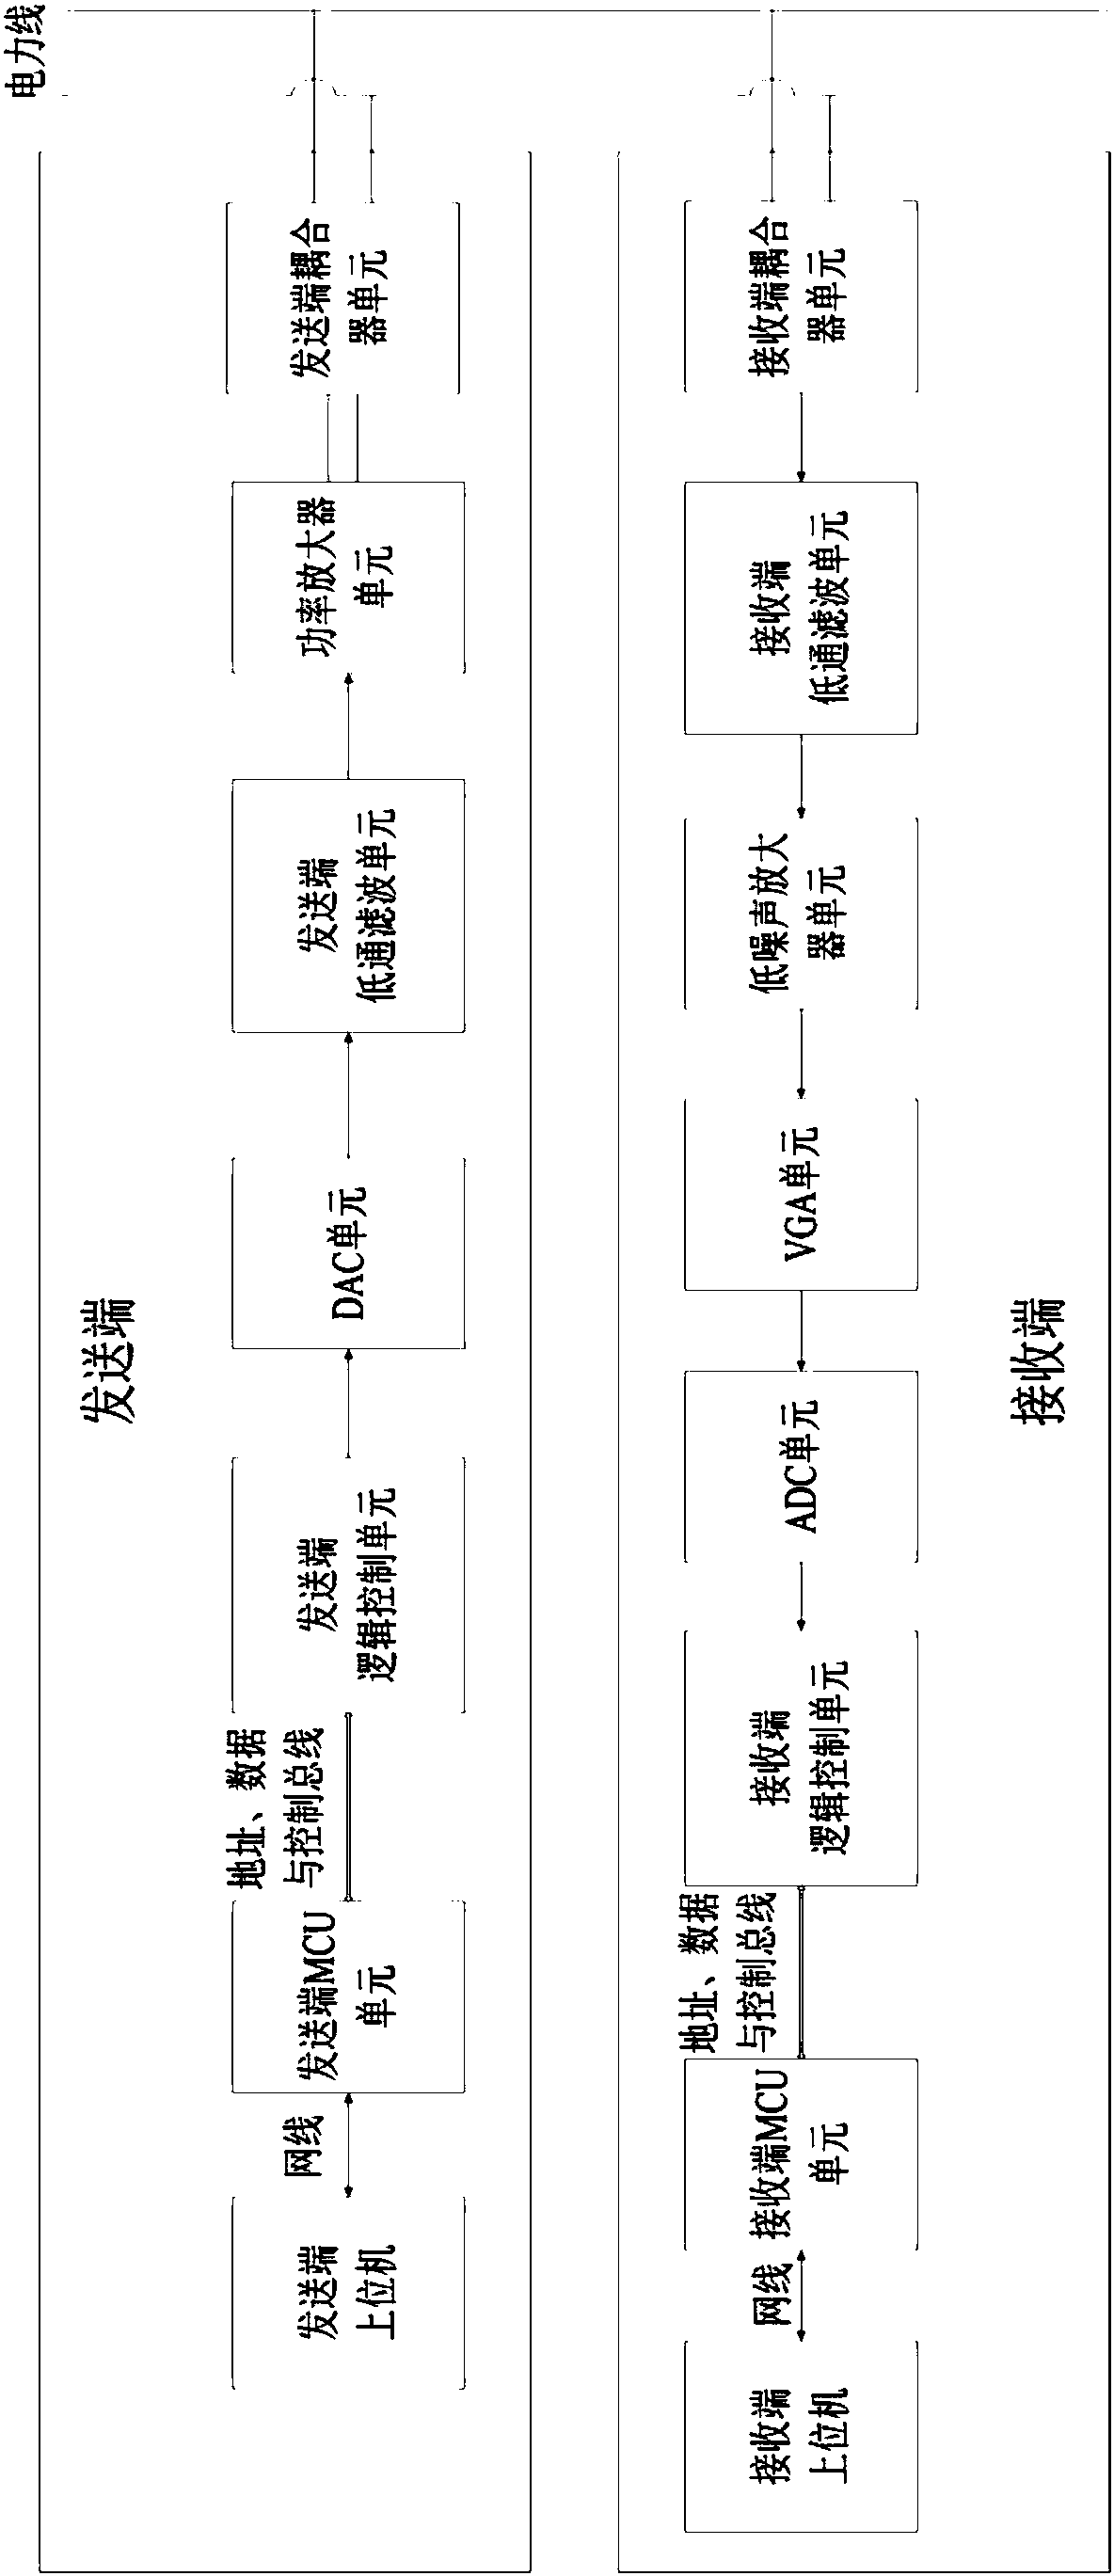 Multipath Delay Measurement Method for Power Line Carrier Channel